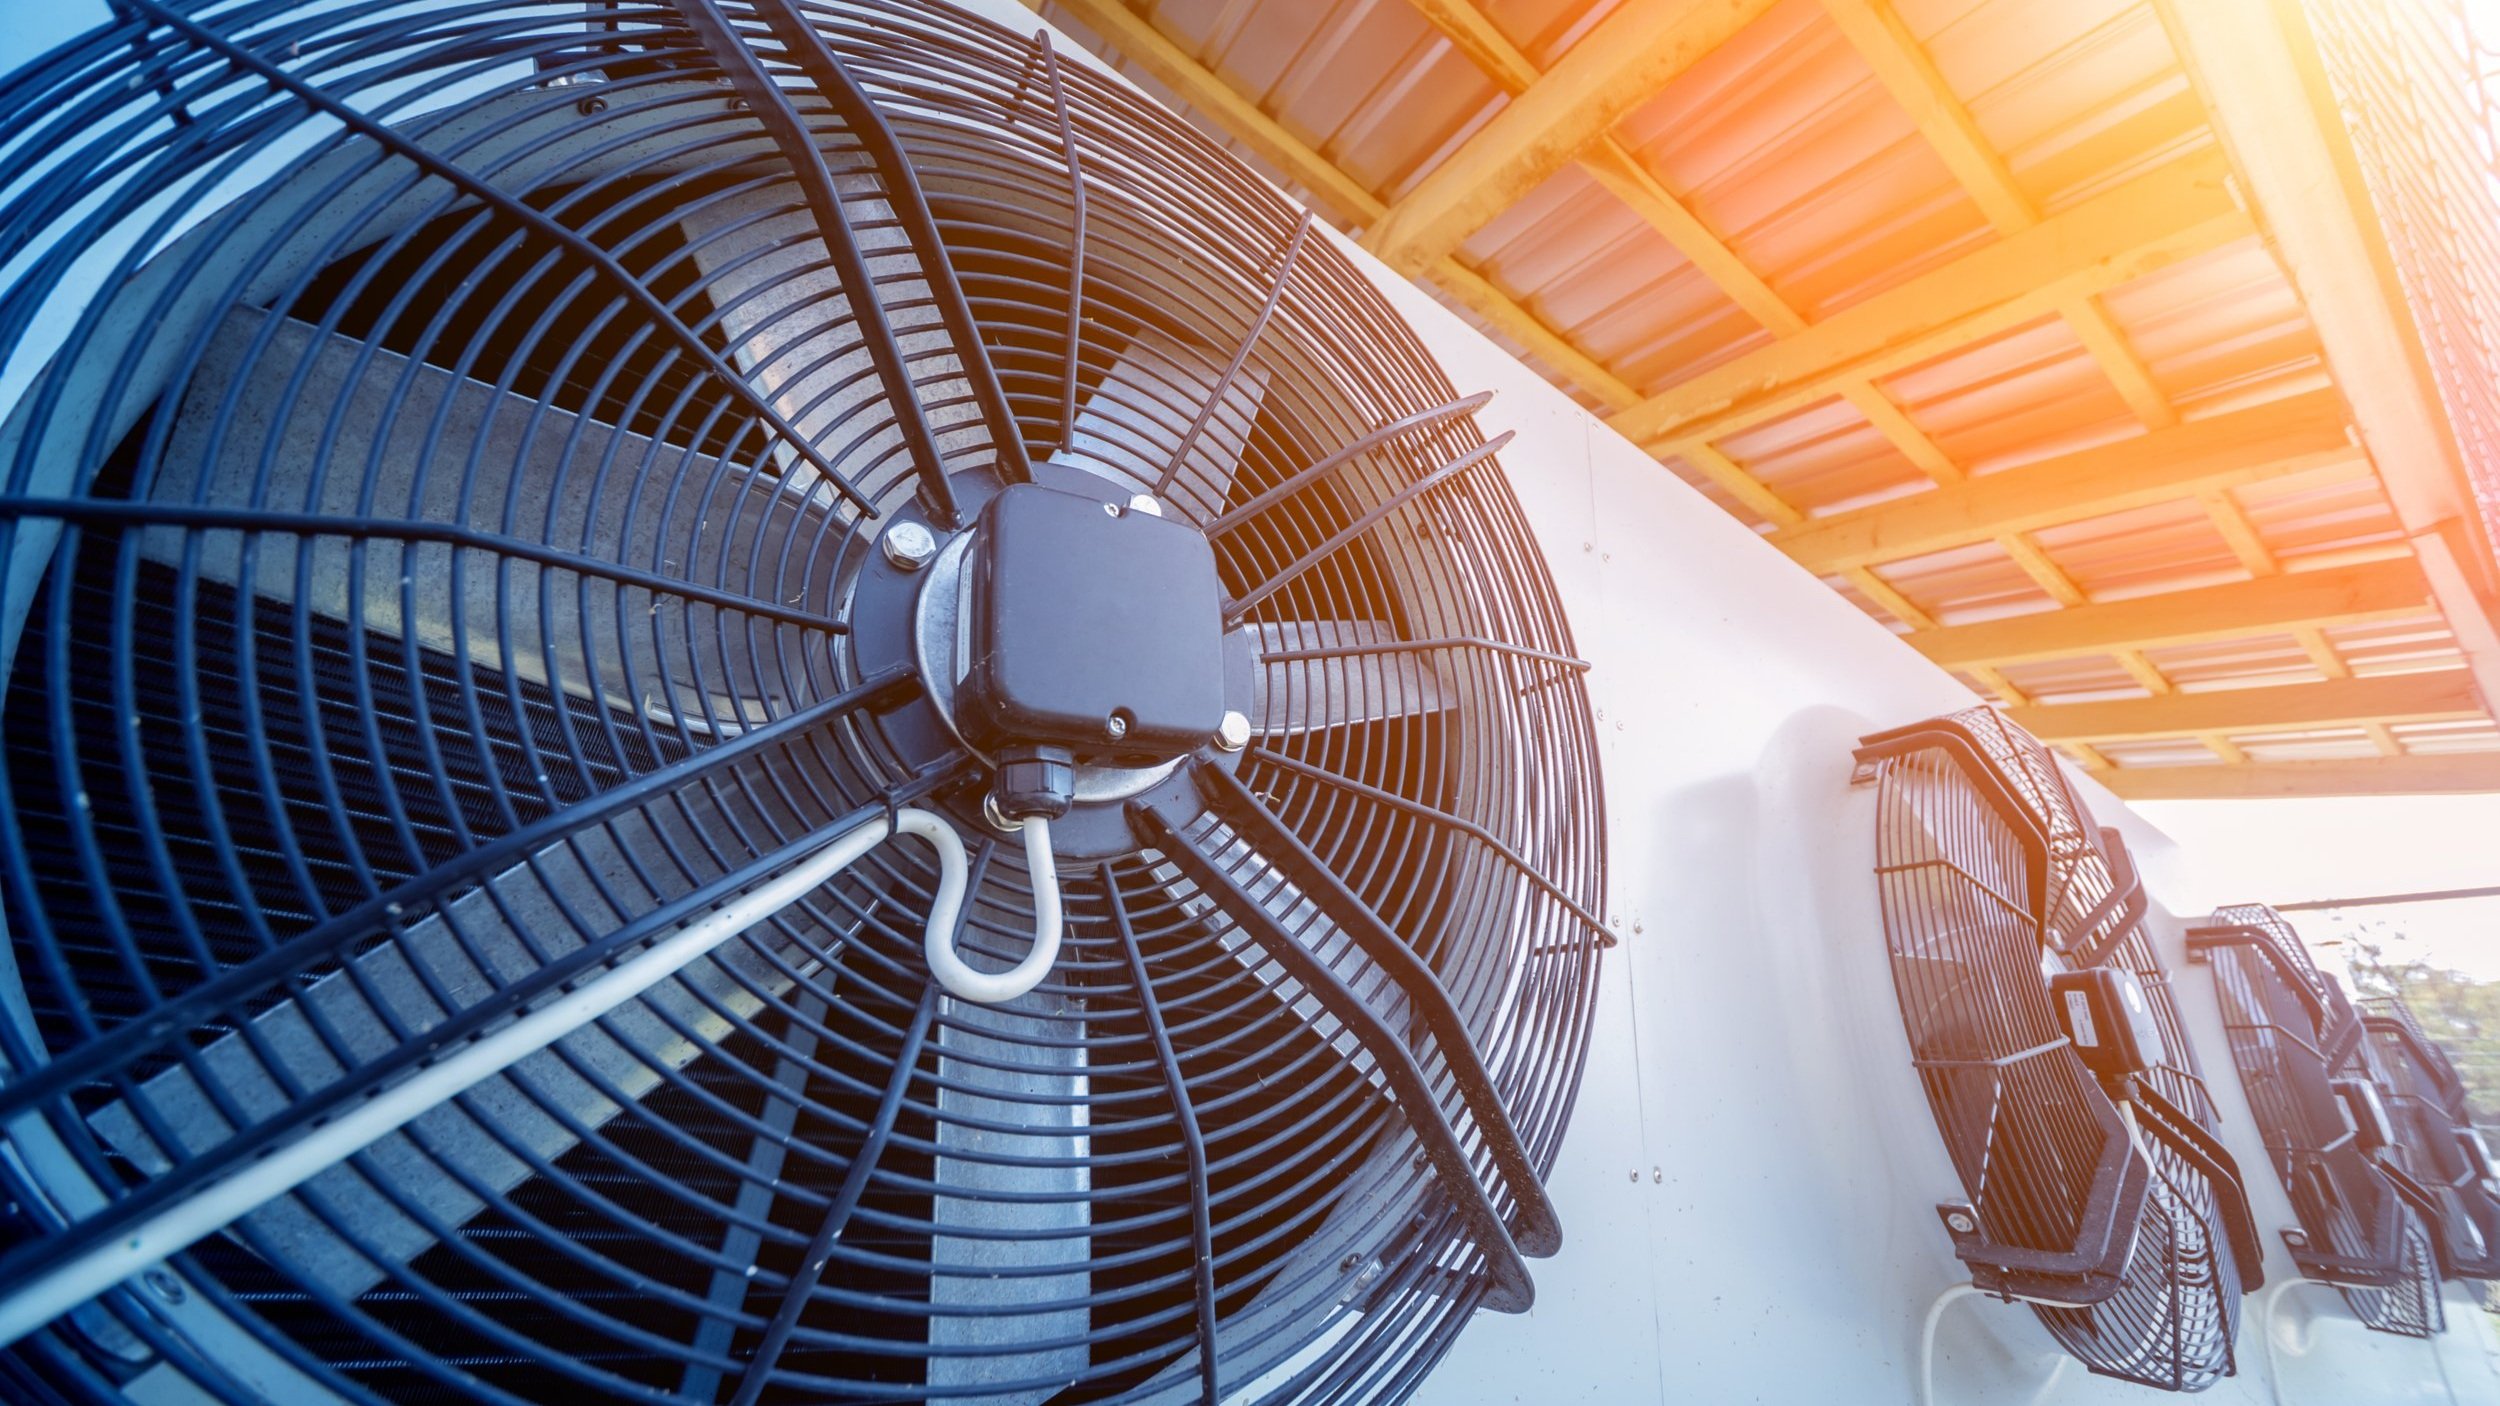   Need Equipment Replacement?   Commercial Express HVAC specializes in efficient equipment replacement projects throughout the Virginia, Maryland, DC area.   LEARN MORE  